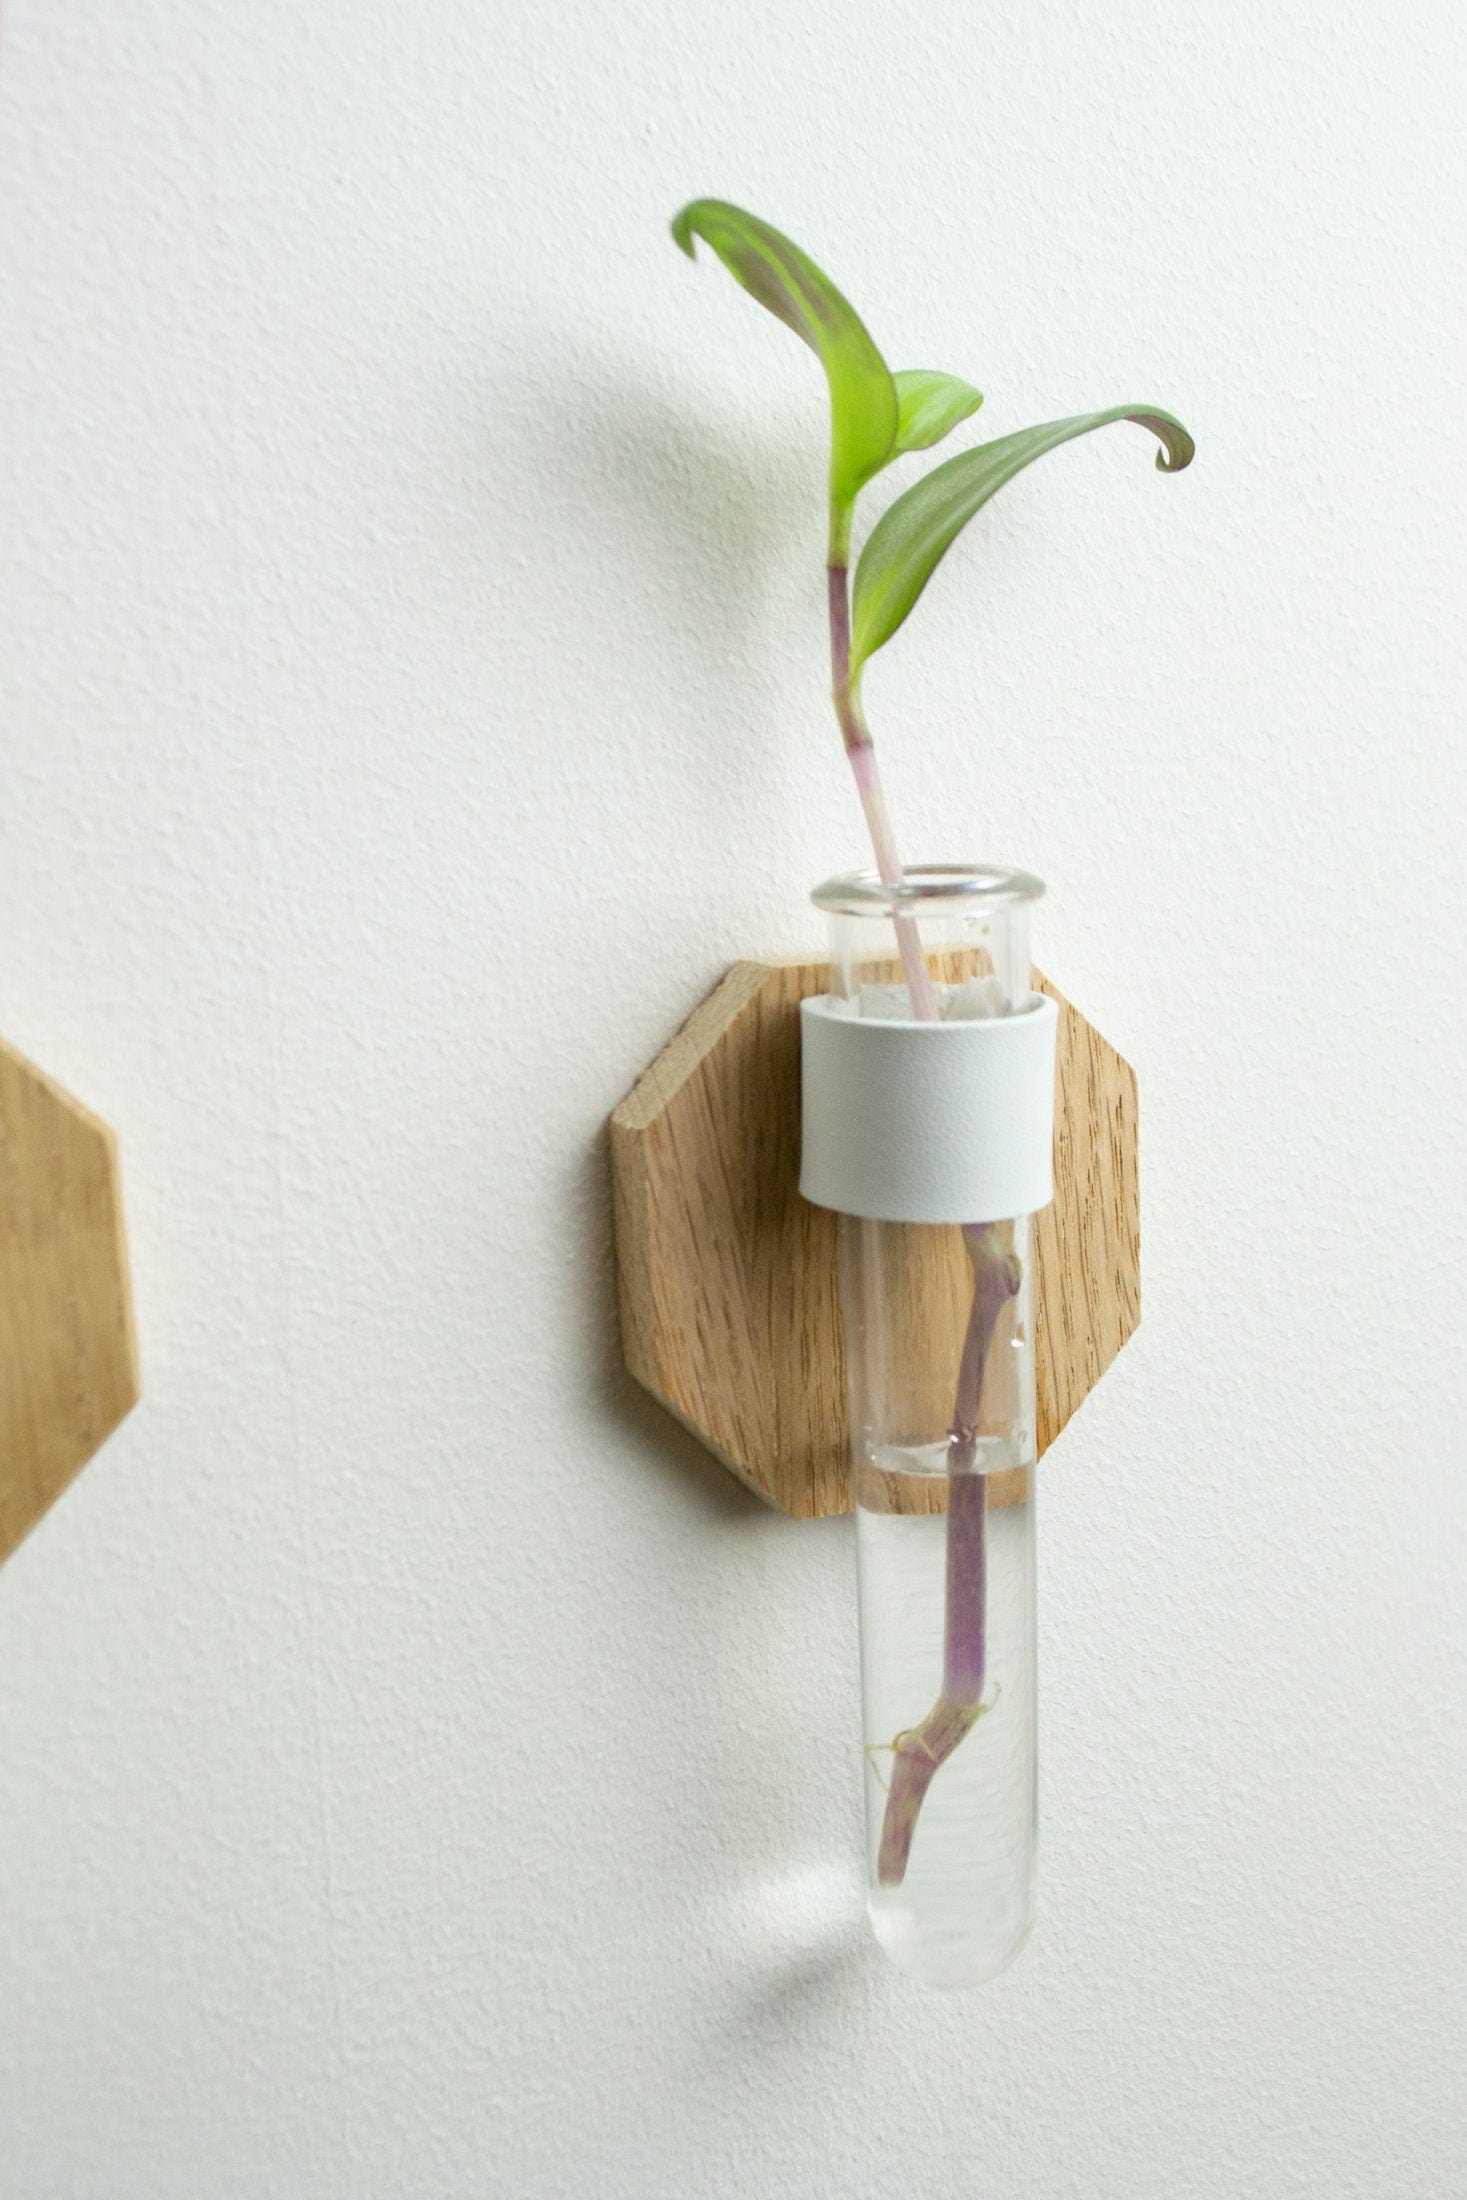 Modern Test Tube Propagation Planter, To DIY or To Buy!!